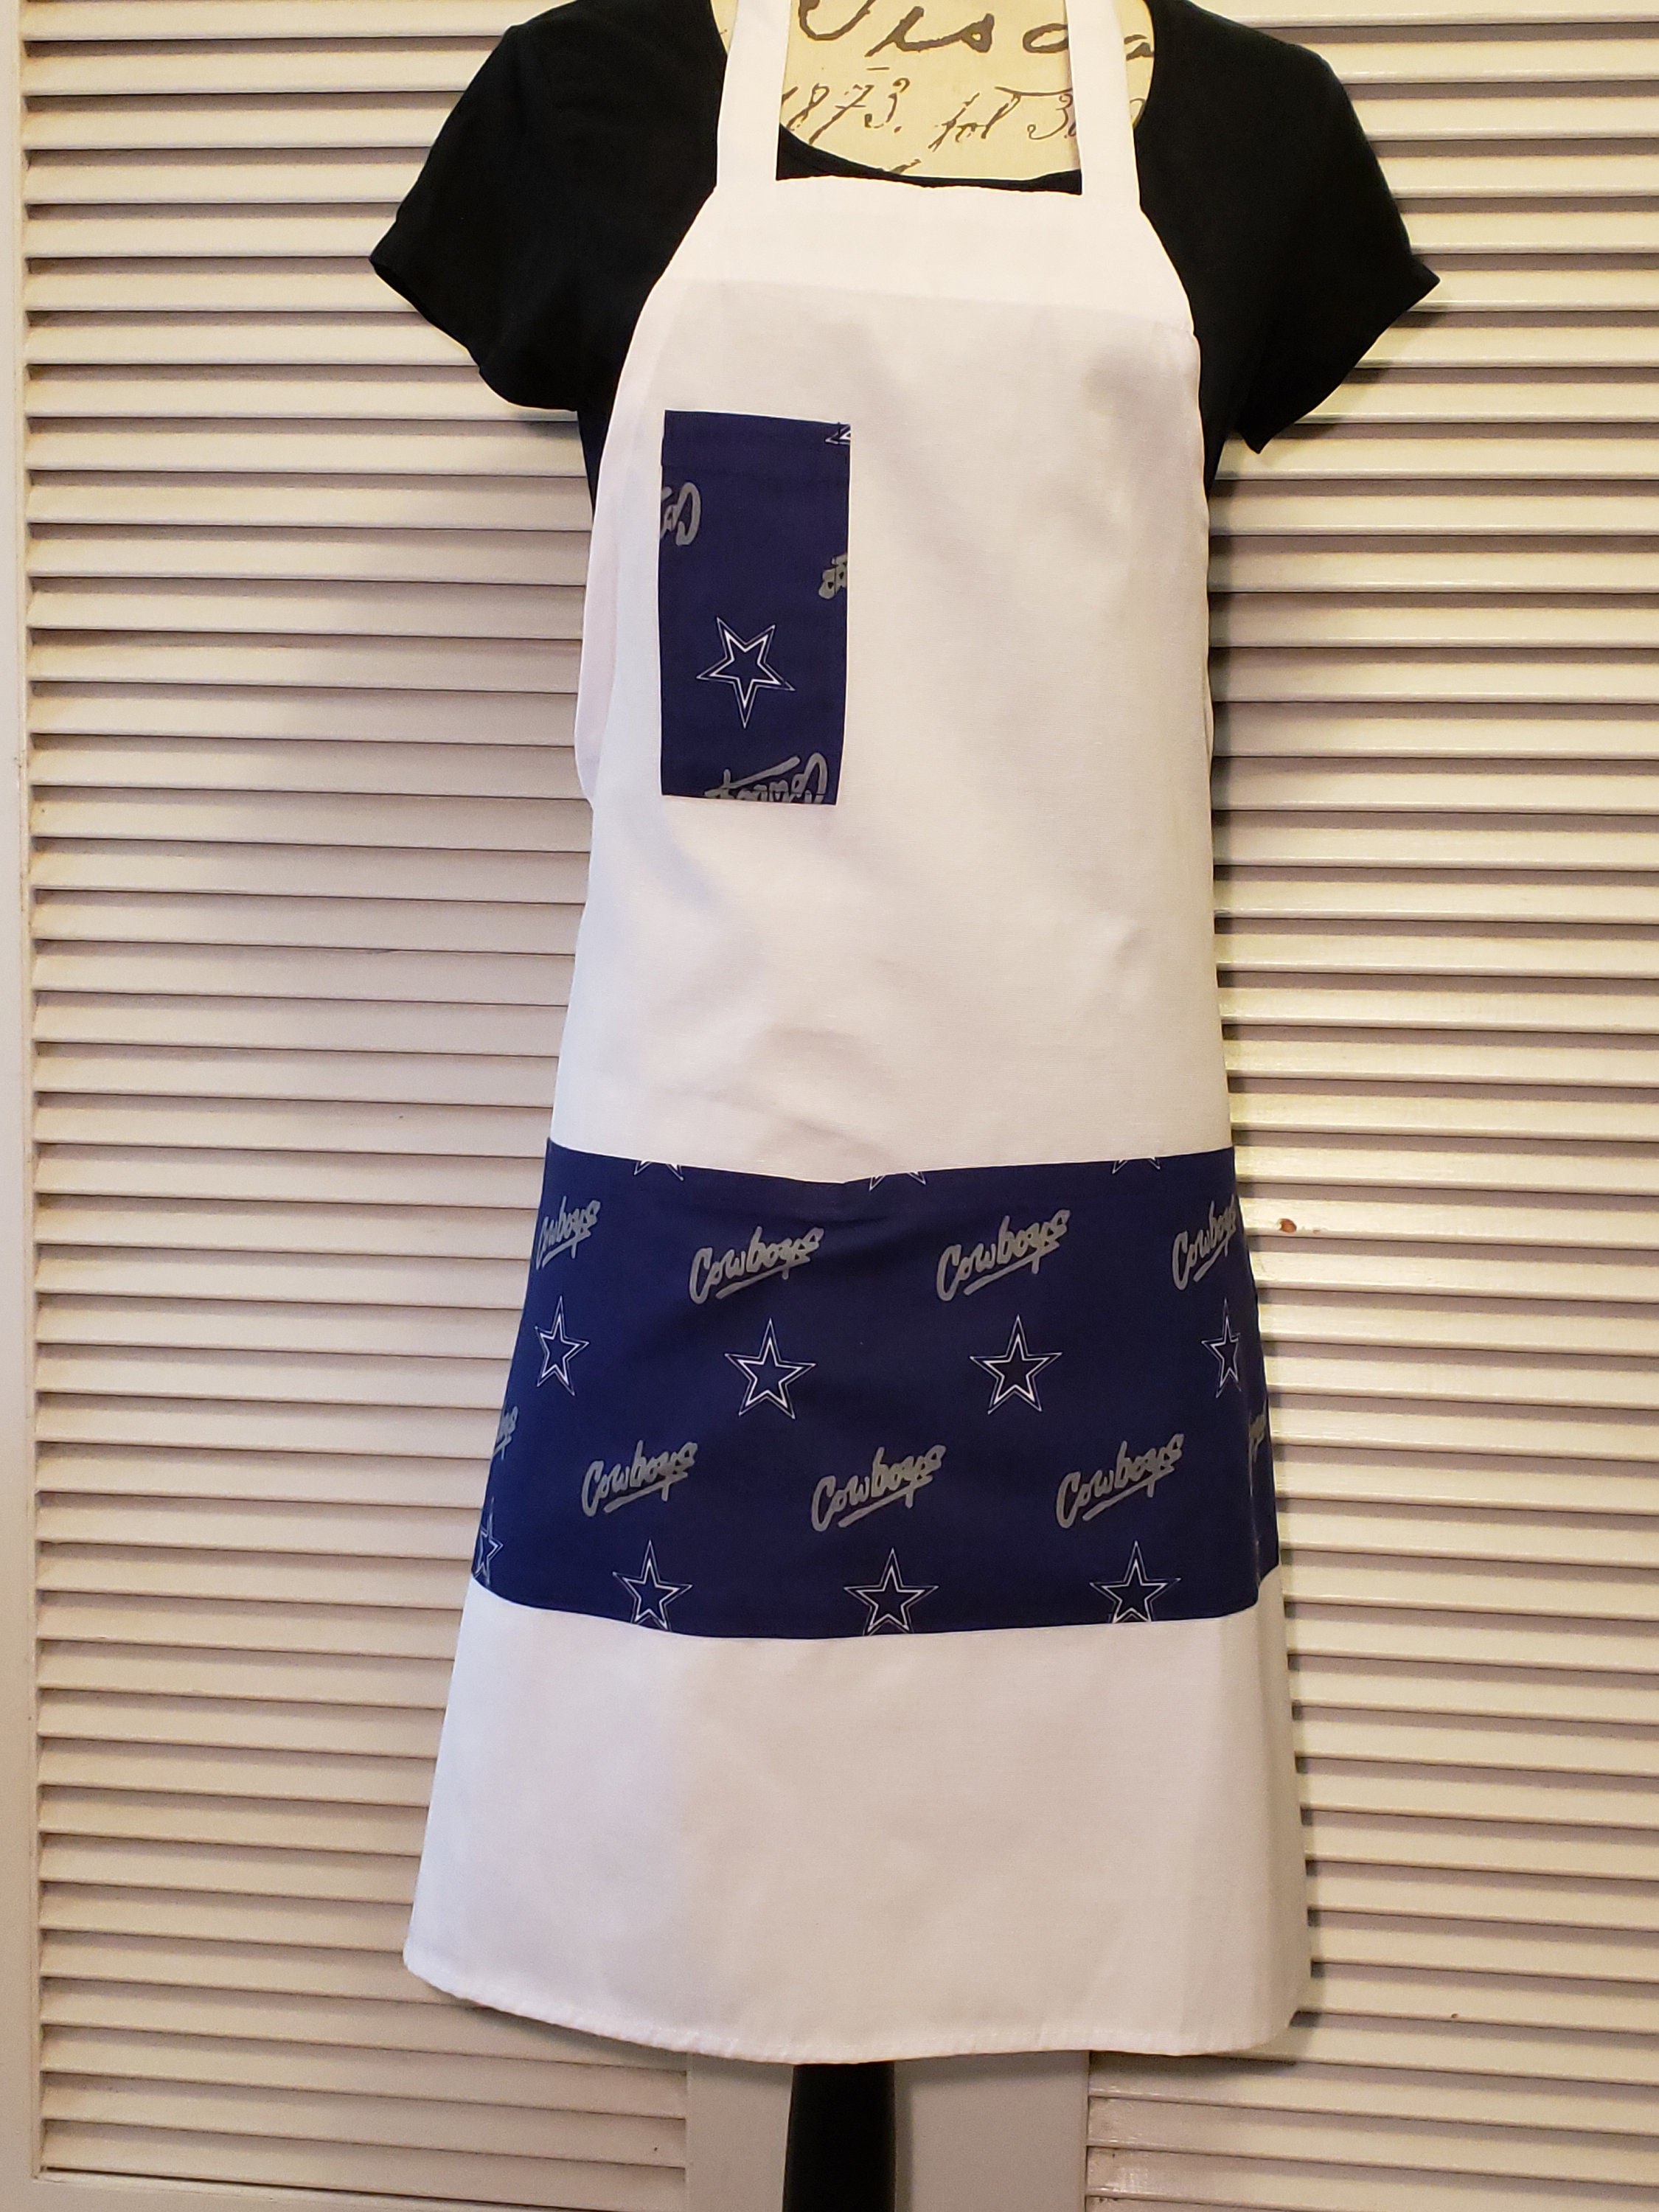 Inspired Dallas Cowboys Apron Any team available